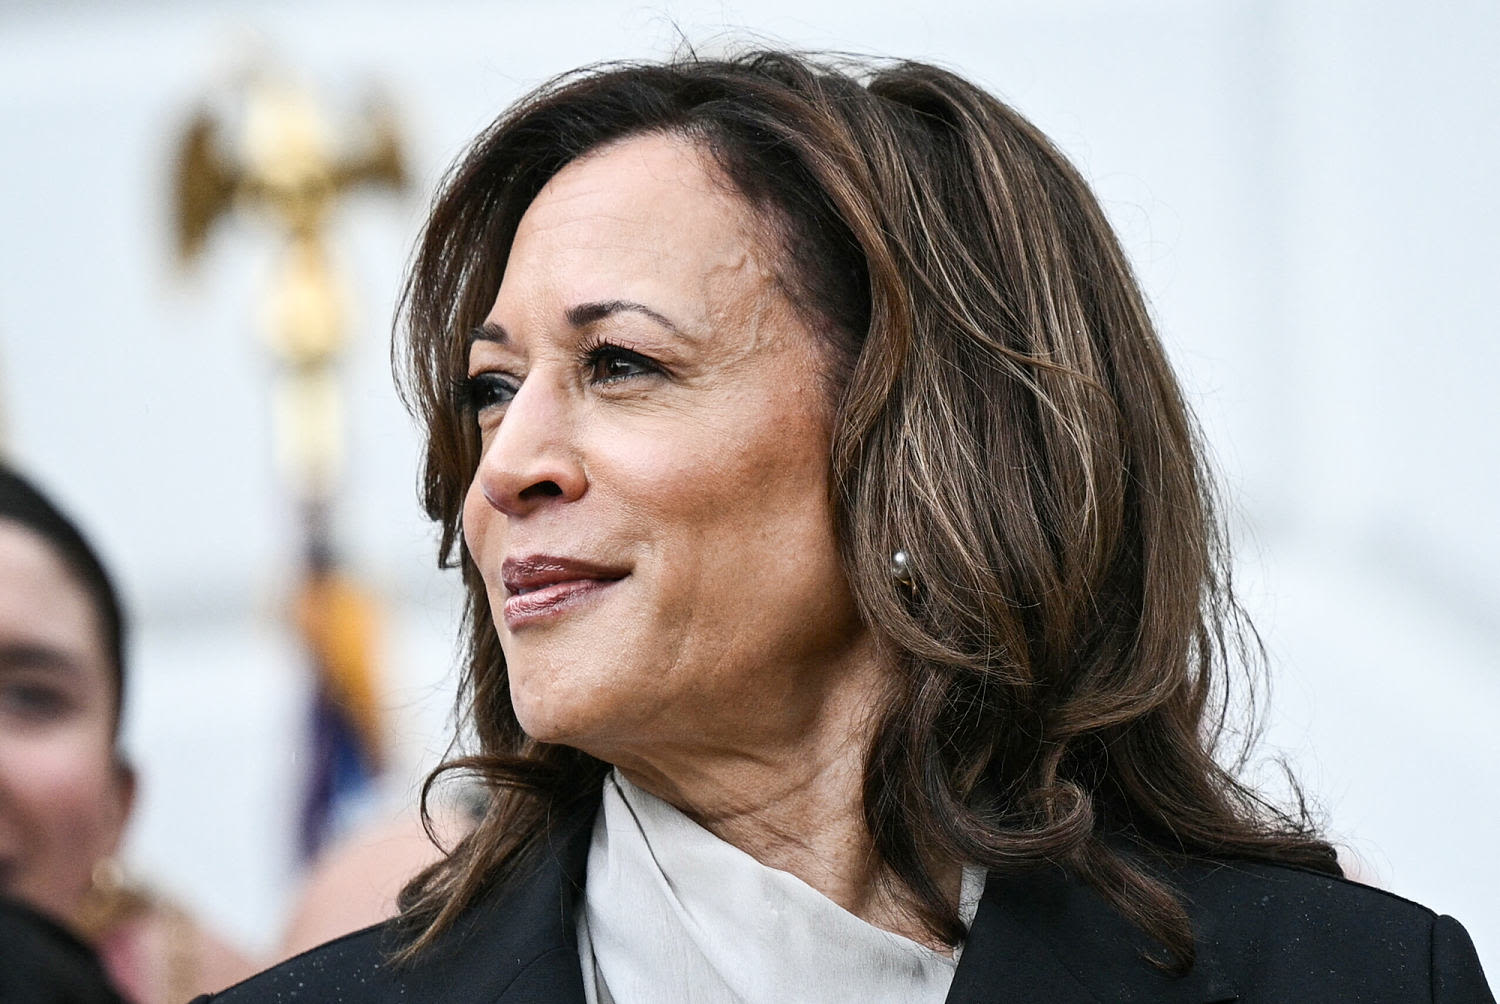 Democrats rally around Harris as her campaign takes shape: From the Politics Desk